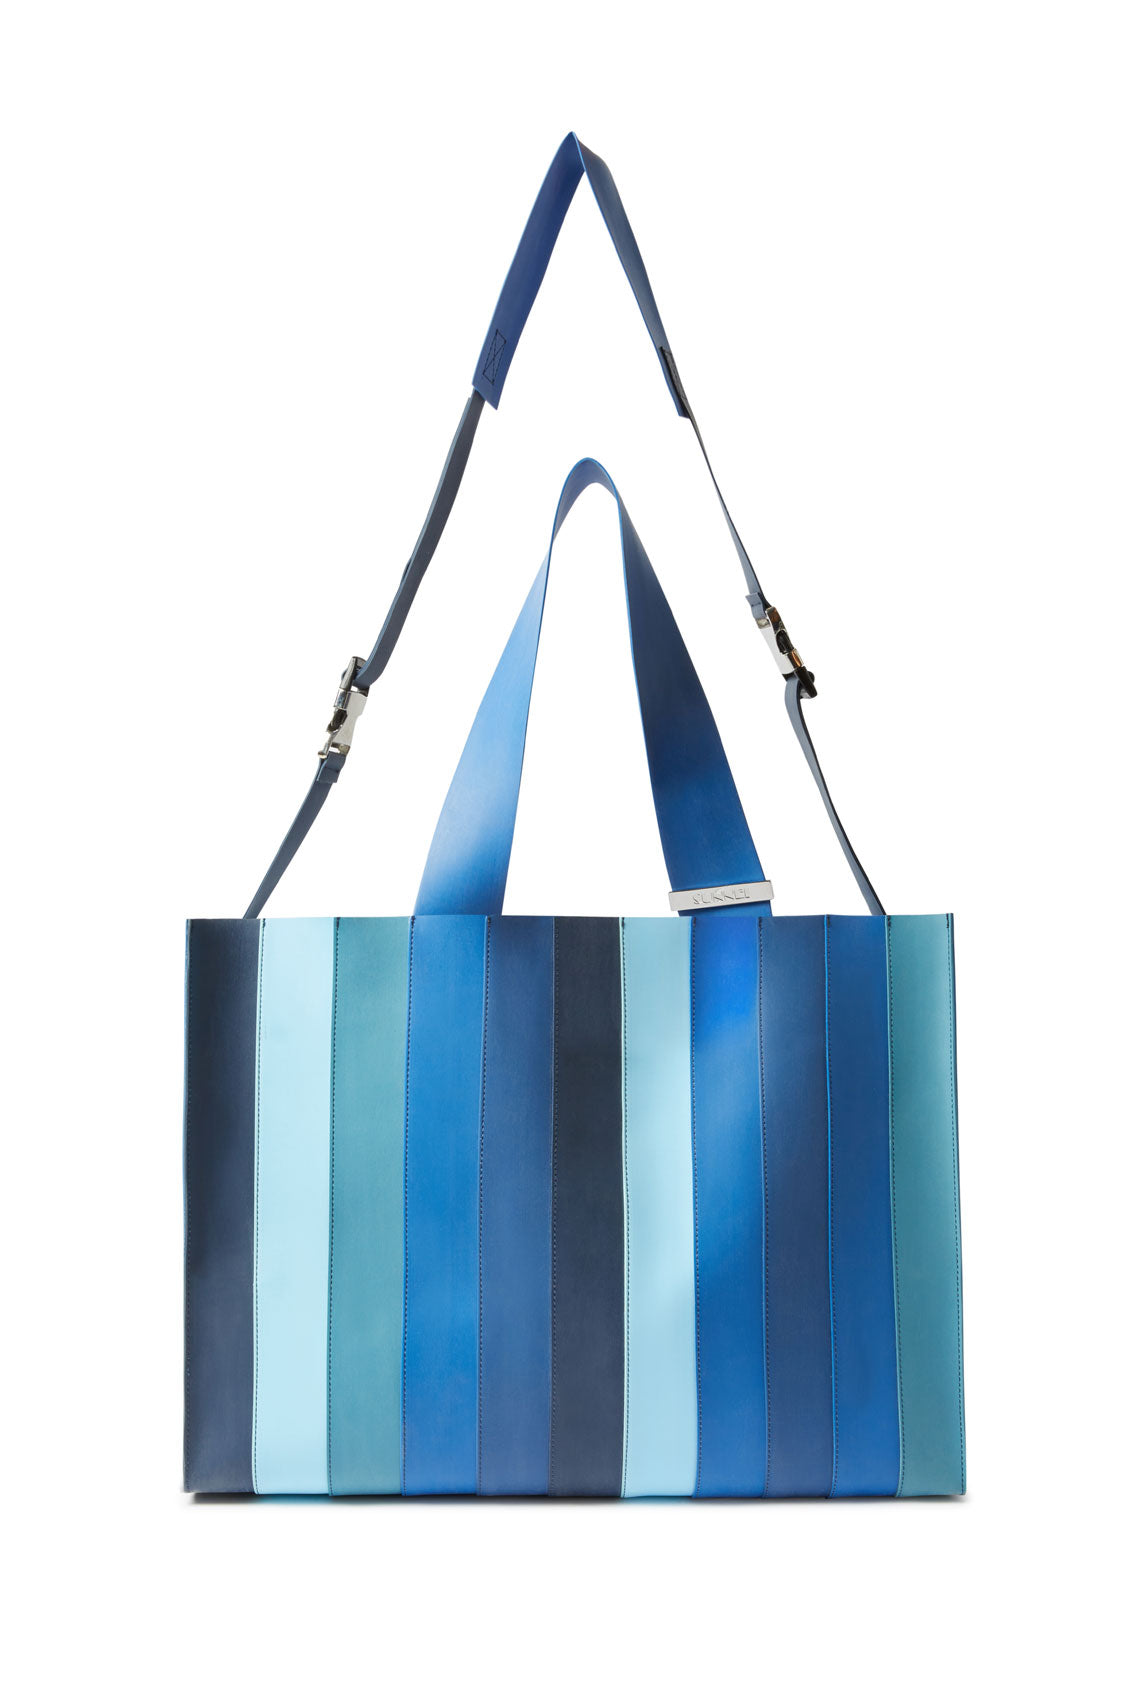 GRADIENT BLUE PUDDING PARALLELEPIPEDO BAG